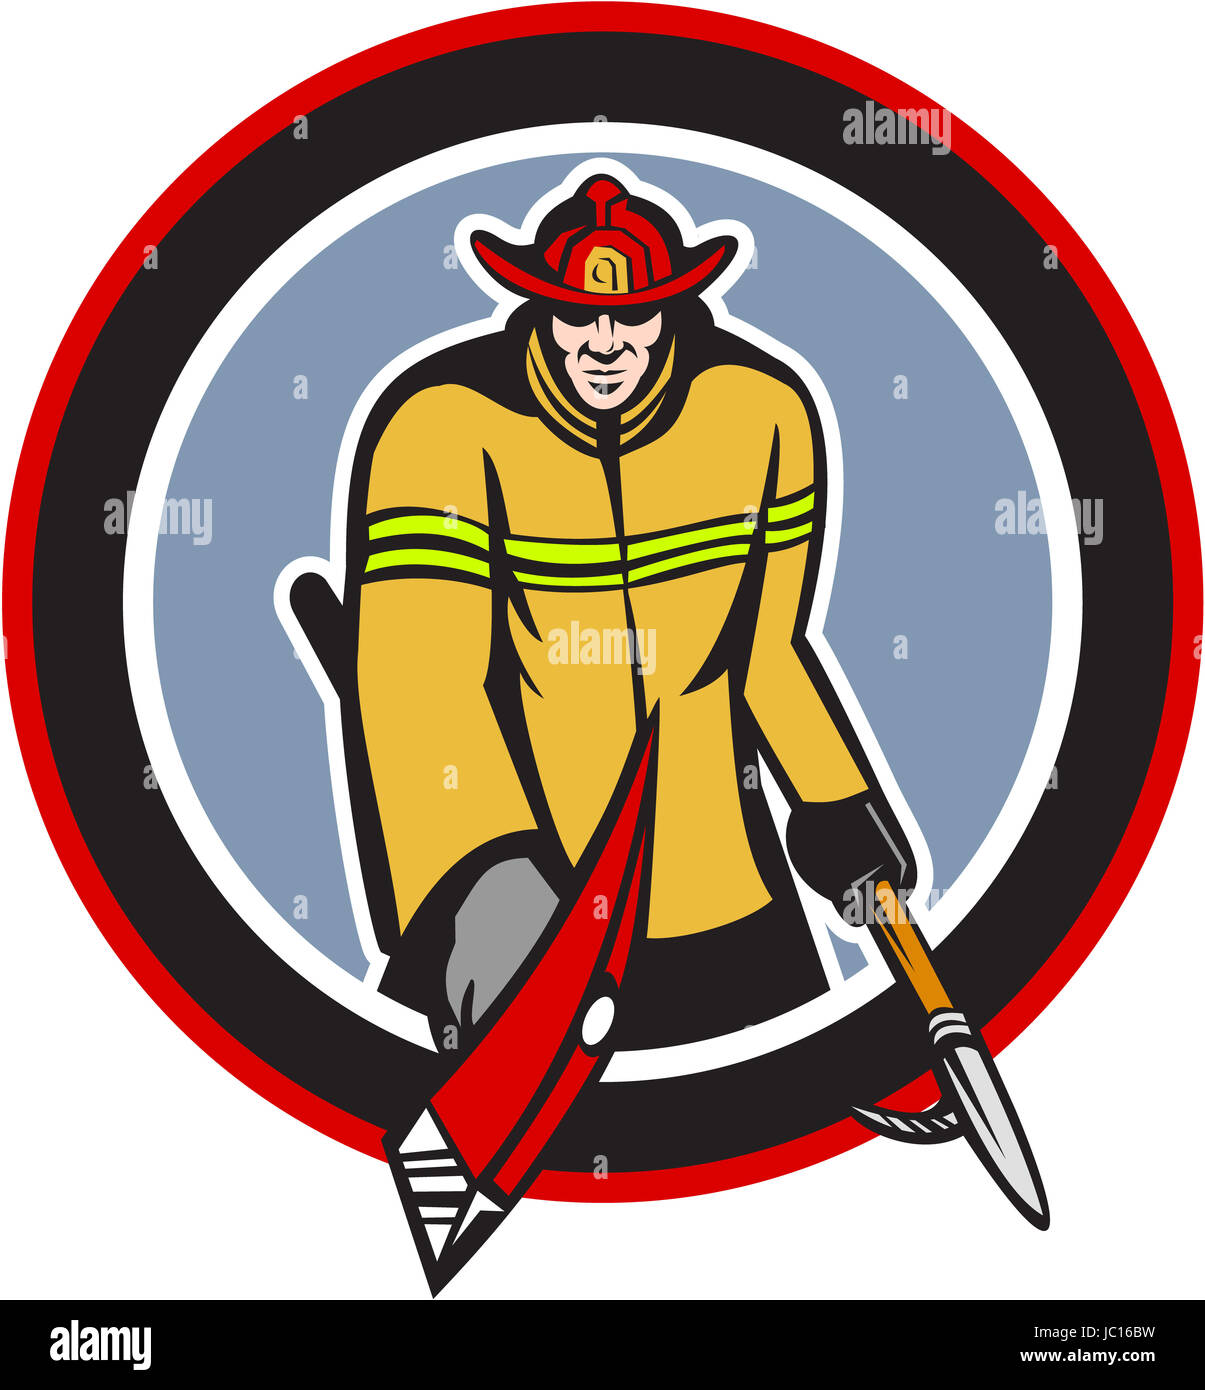 Illustration of a fireman fire fighter emergency worker holding a fire axe and hook pike pole viewed from front set inside circle done in retro style. Stock Photo